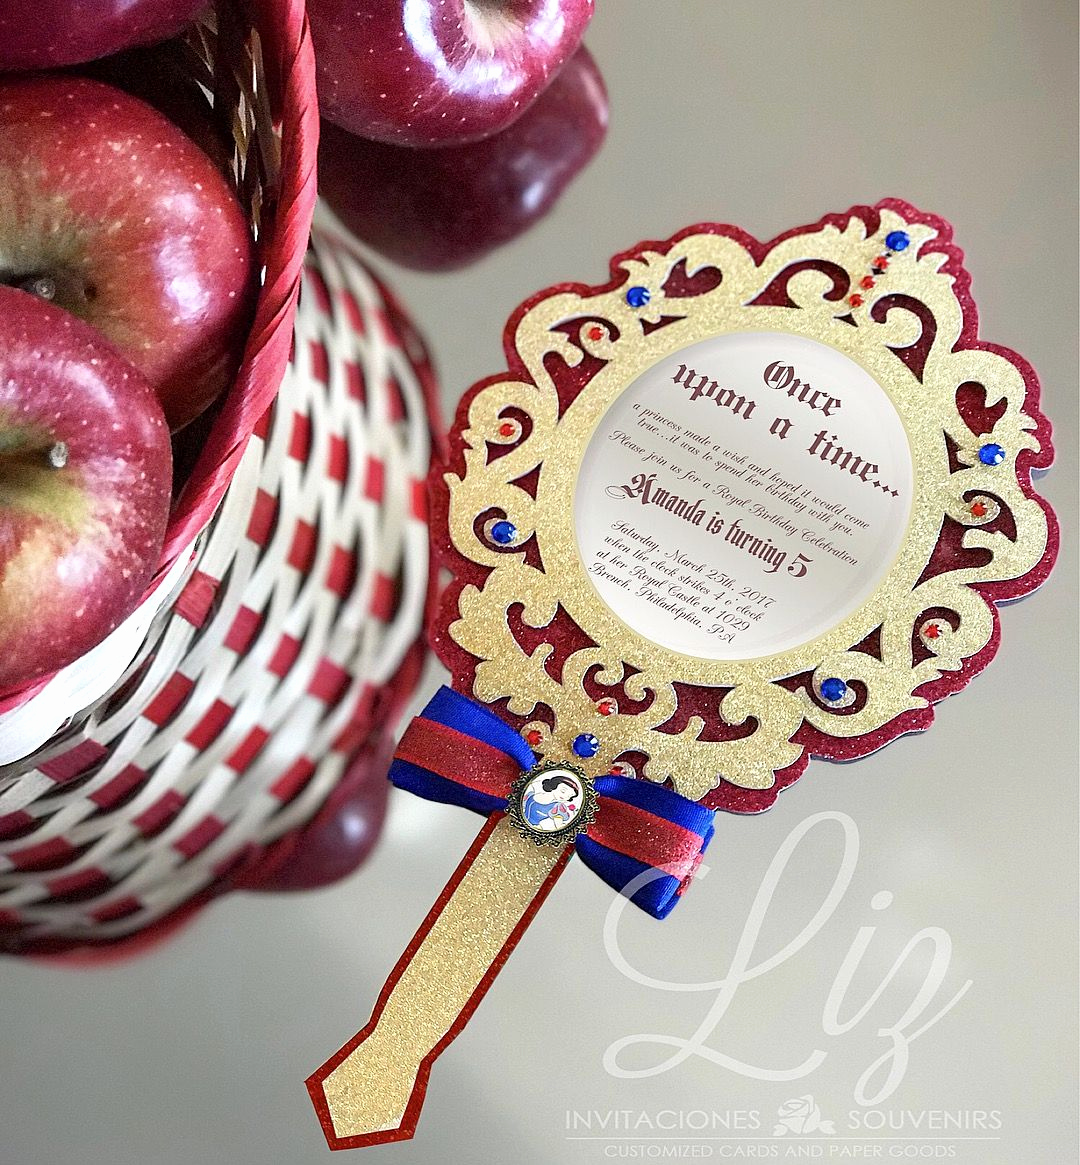 Snow White Mirror Invitation Best Of Mirror Mirror On the Wall who is the Fairest Birthday